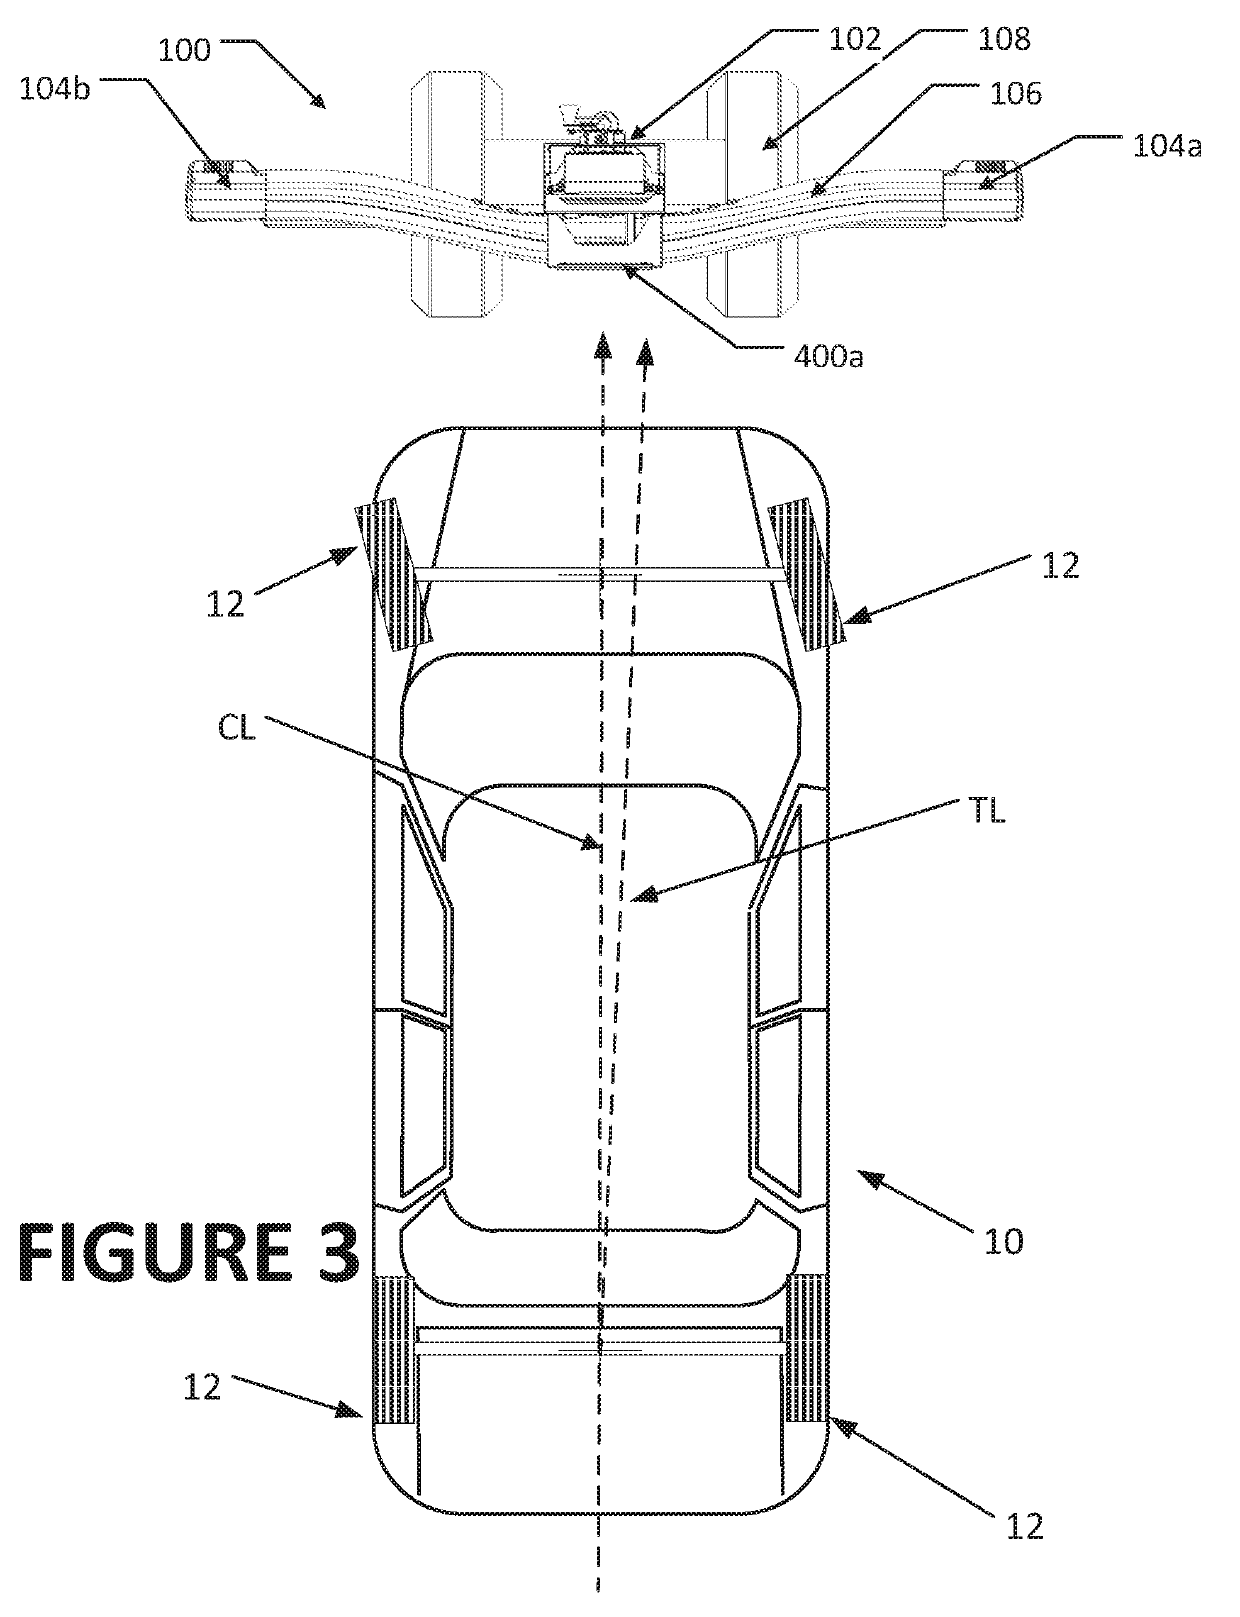 Vehicle wheel alignment measurement system camera and adas calibration support structure